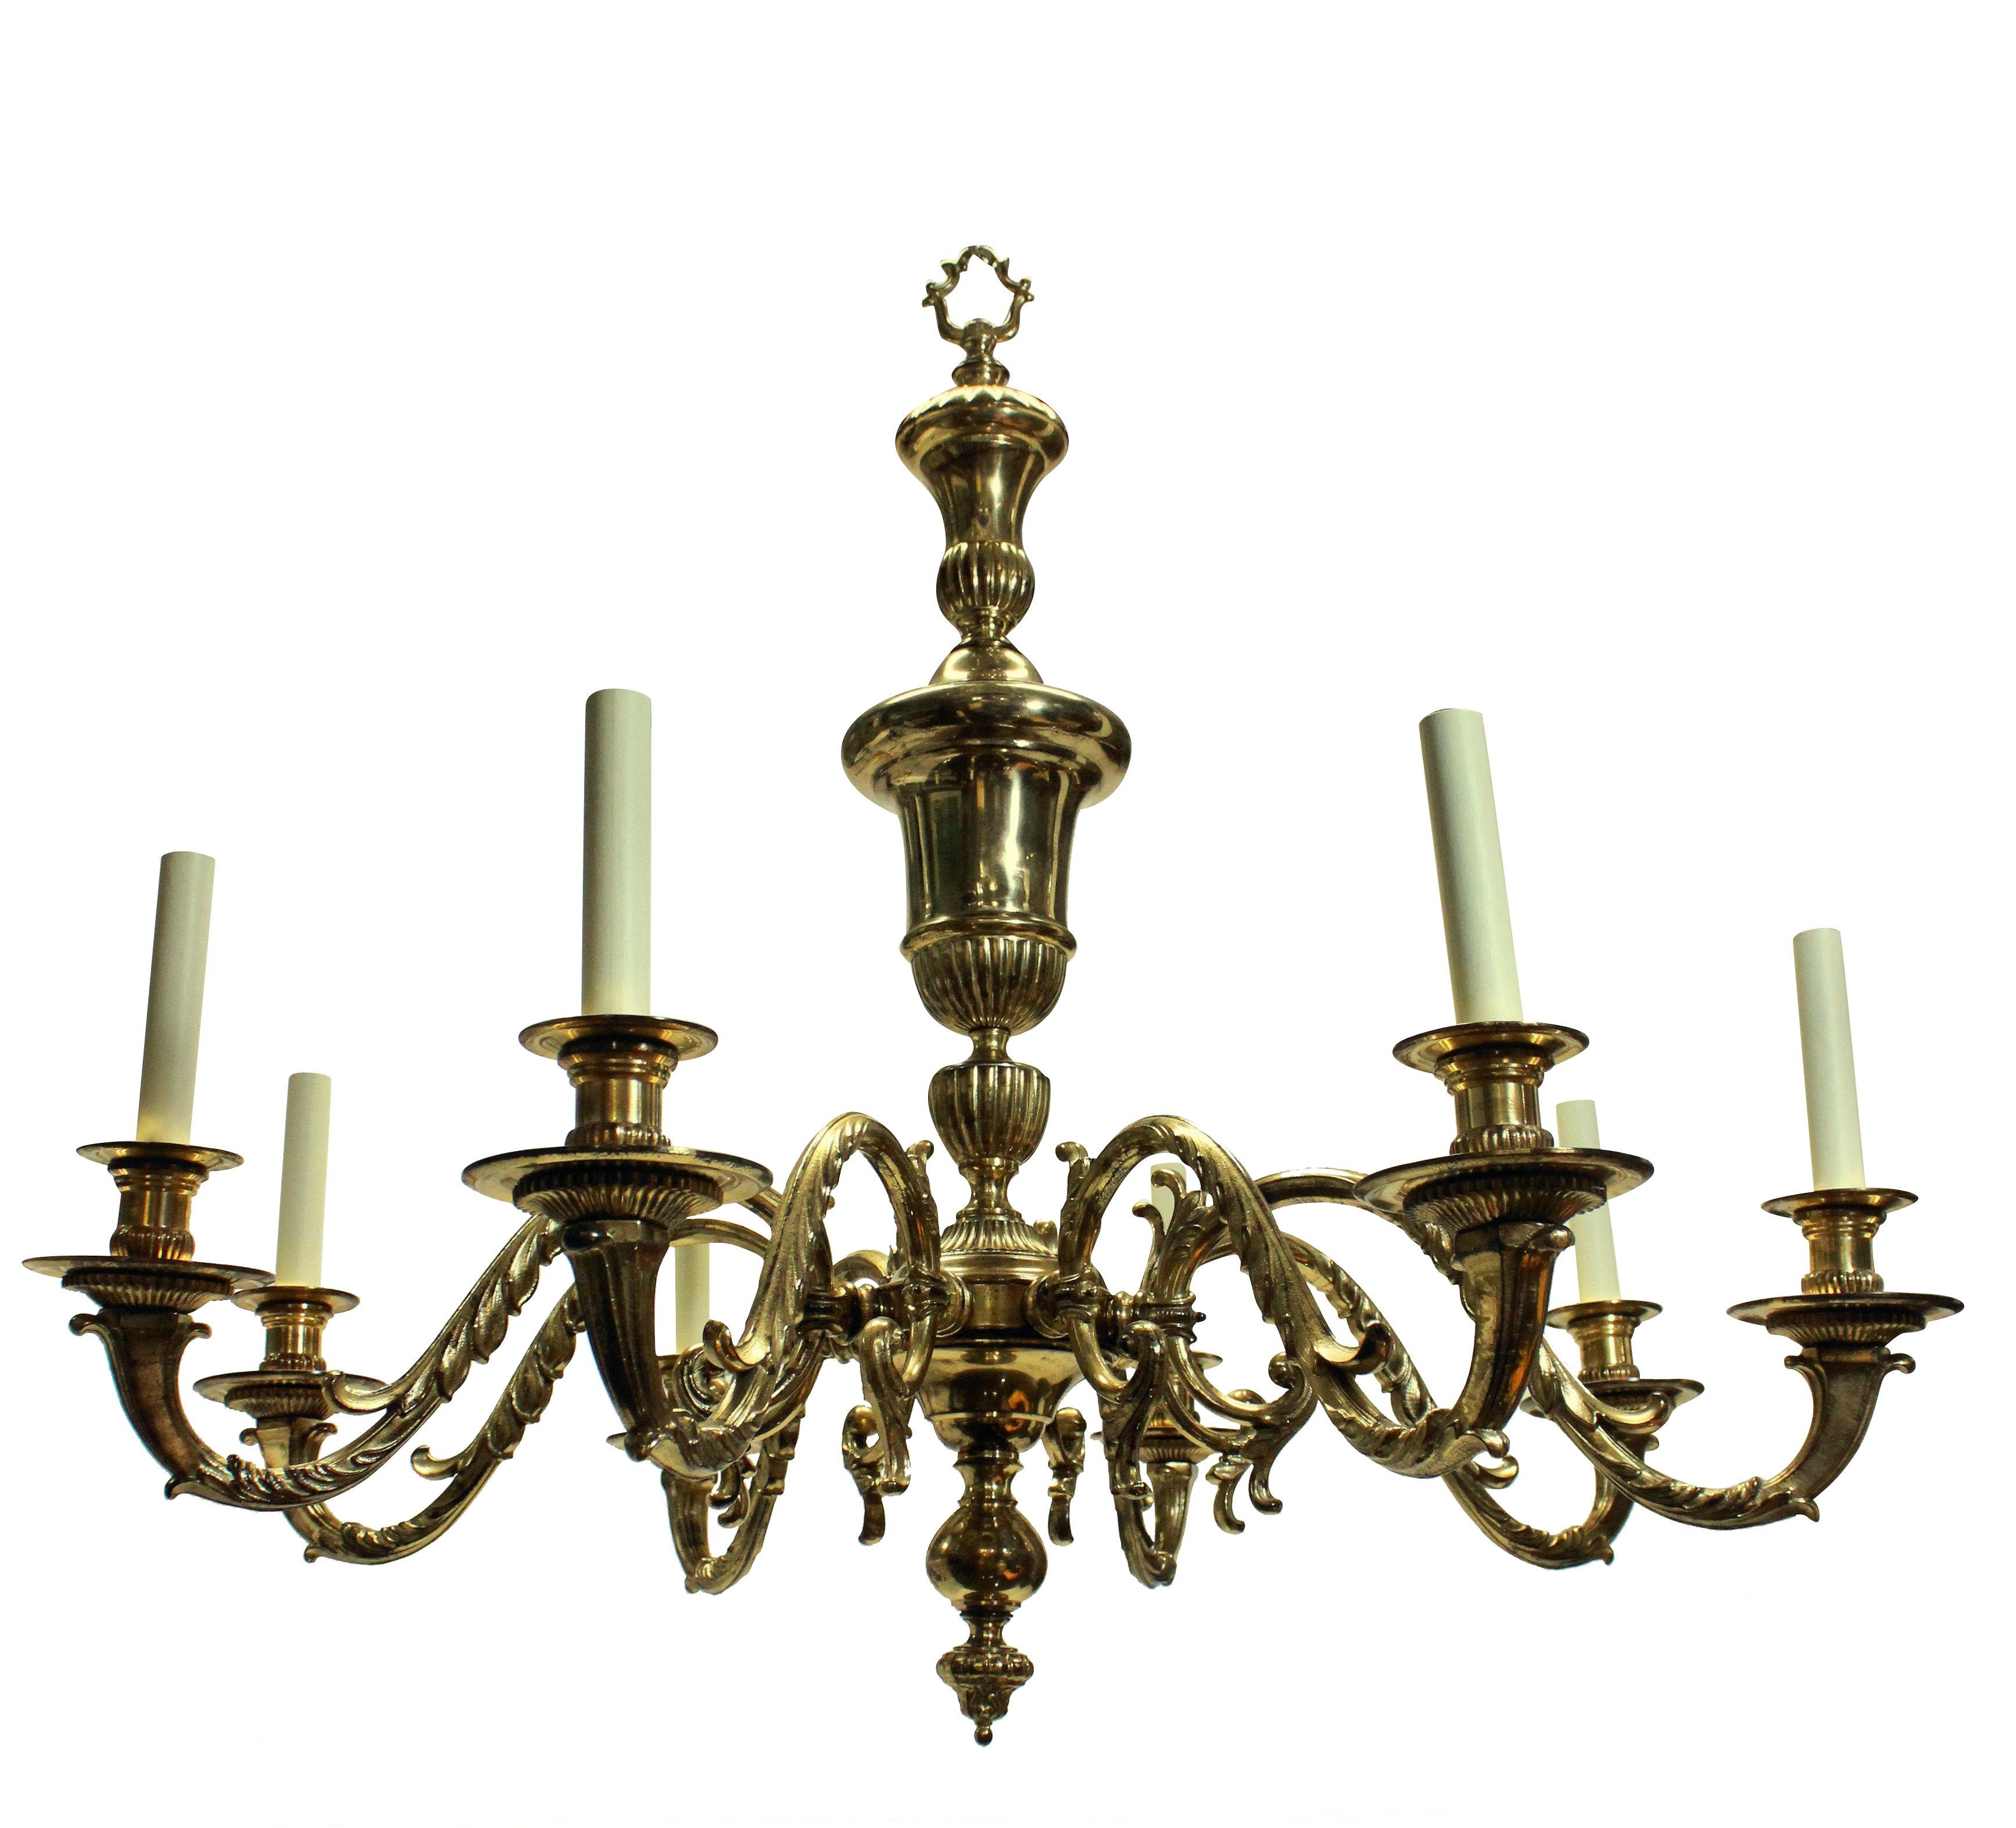 A large and impressive pair of Charles II style gilt brass eight branch chandeliers, with acanthus detailing and central urn. Each with decorative ceiling canopy and chain. Newly electrified.